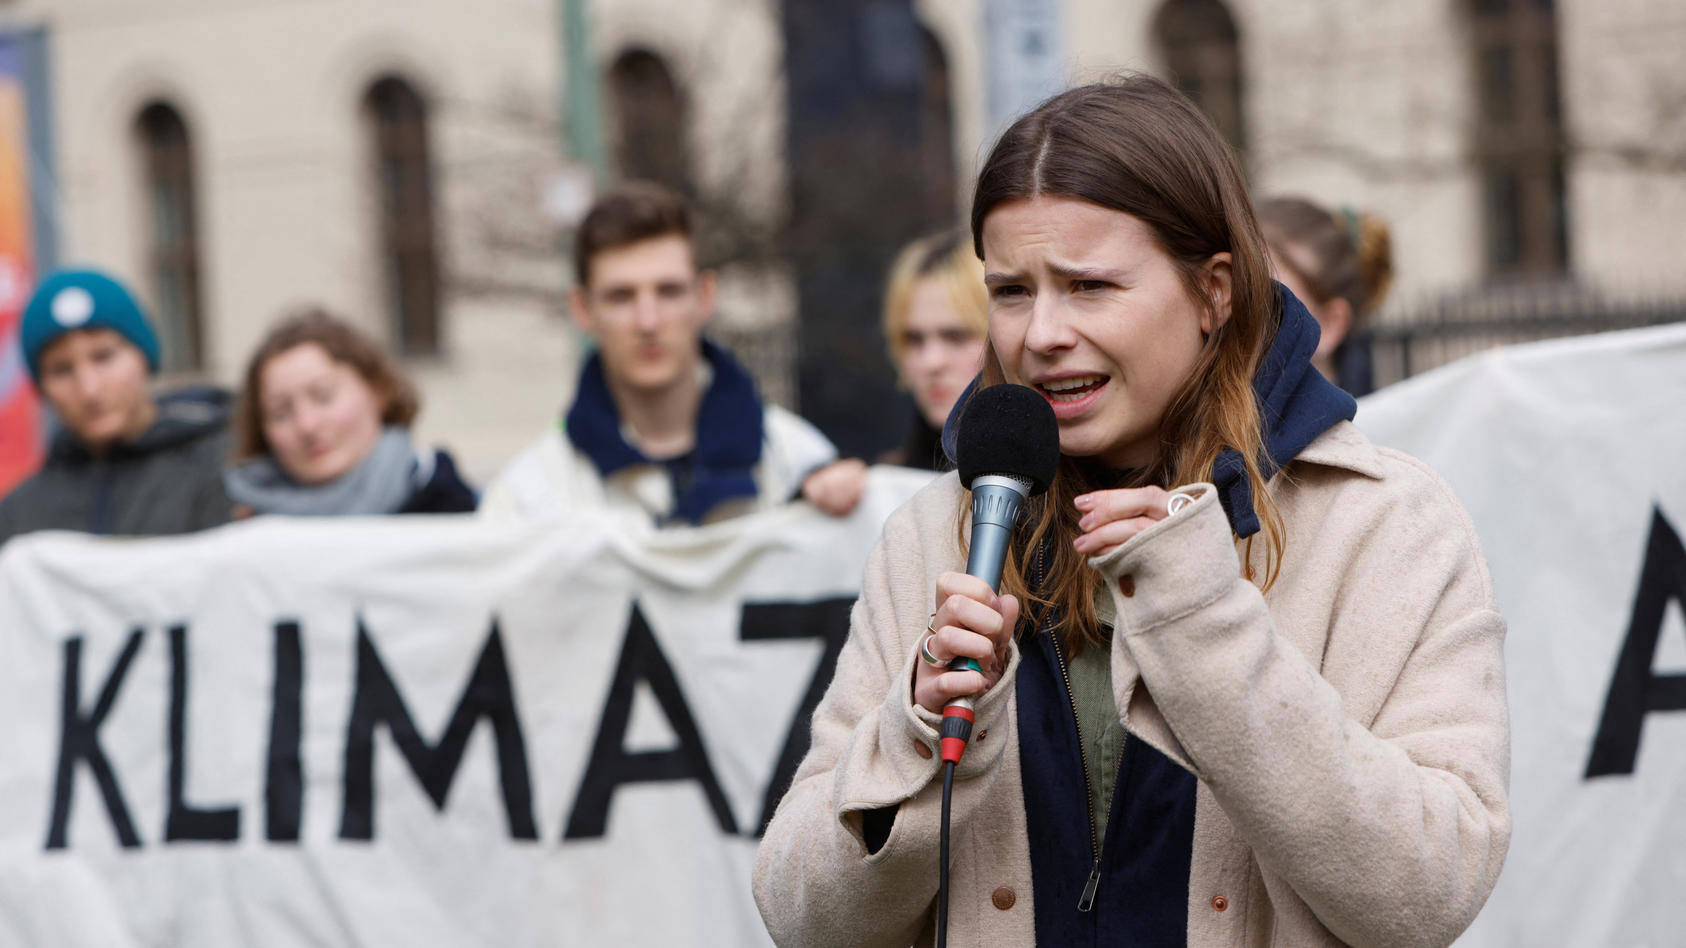 Environment activist Luisa Neubauer speaks during a rally of Friday for Future against the climate policy of the government, in Berlin, Germany, March 31, 2023. REUTERS/Michele Tantussi